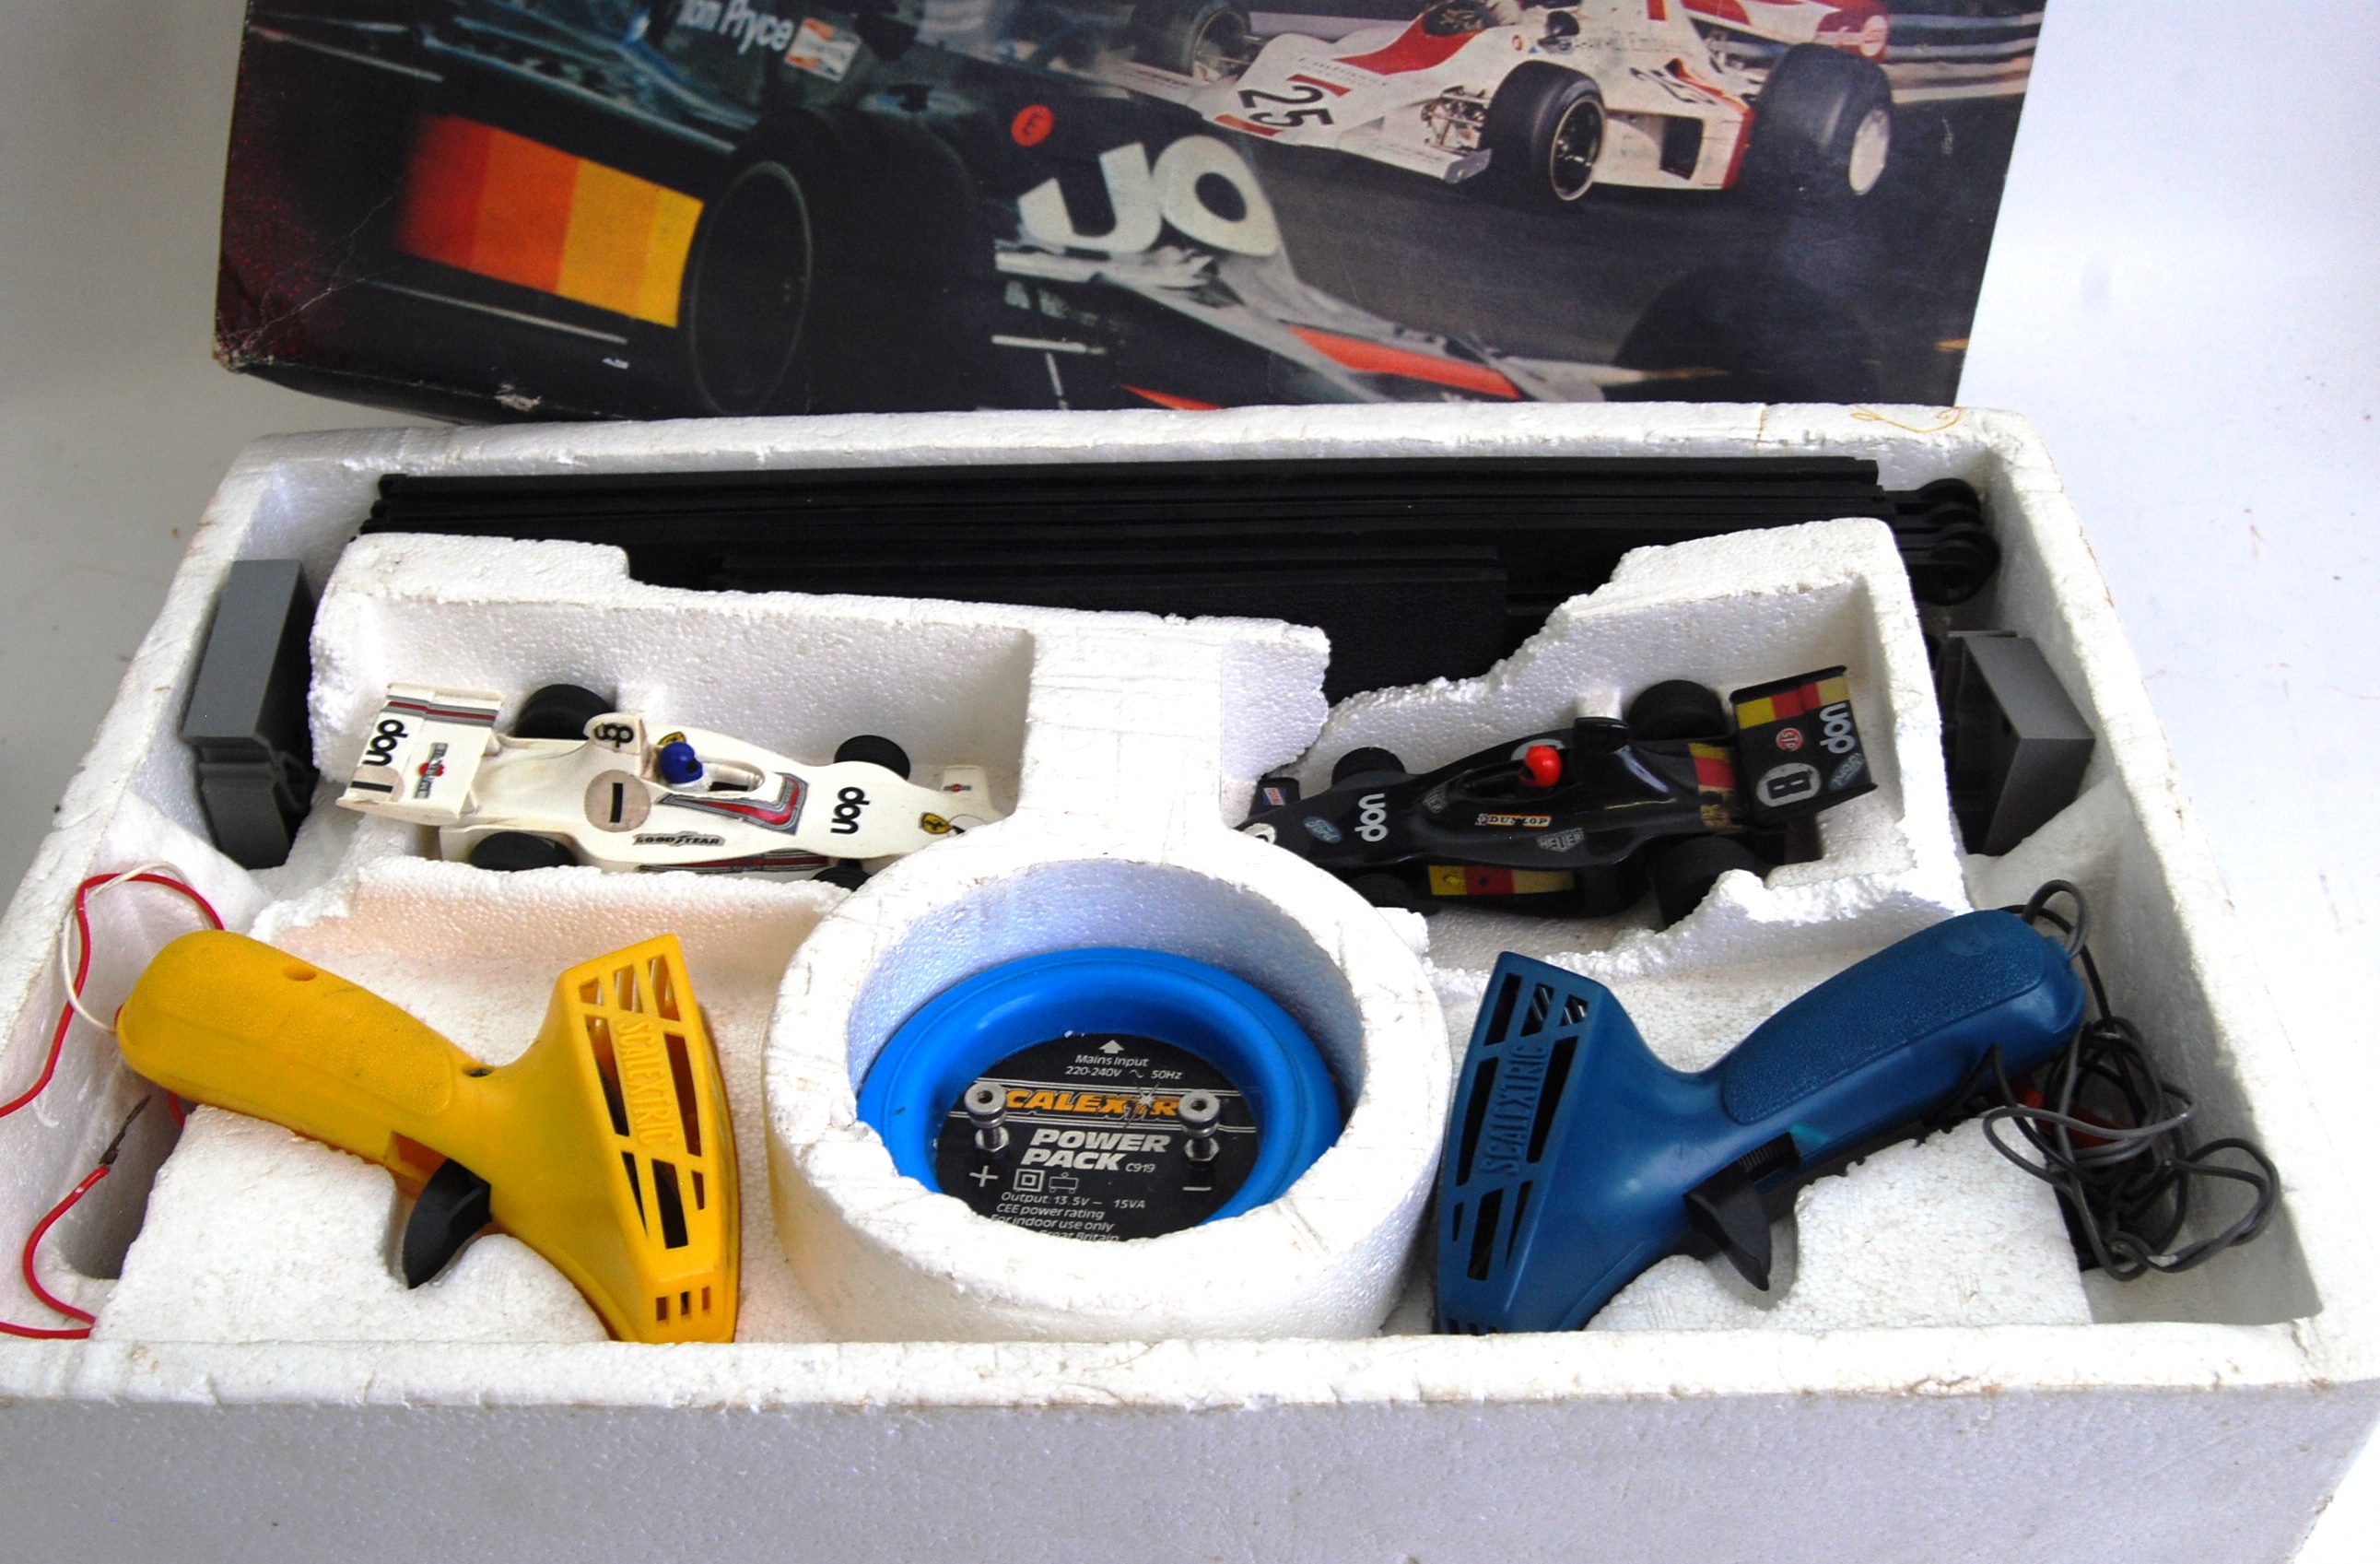 SCALEXTRIC: An original vintage Scalextric set 200 - complete with both cars, in the original box. - Image 3 of 3